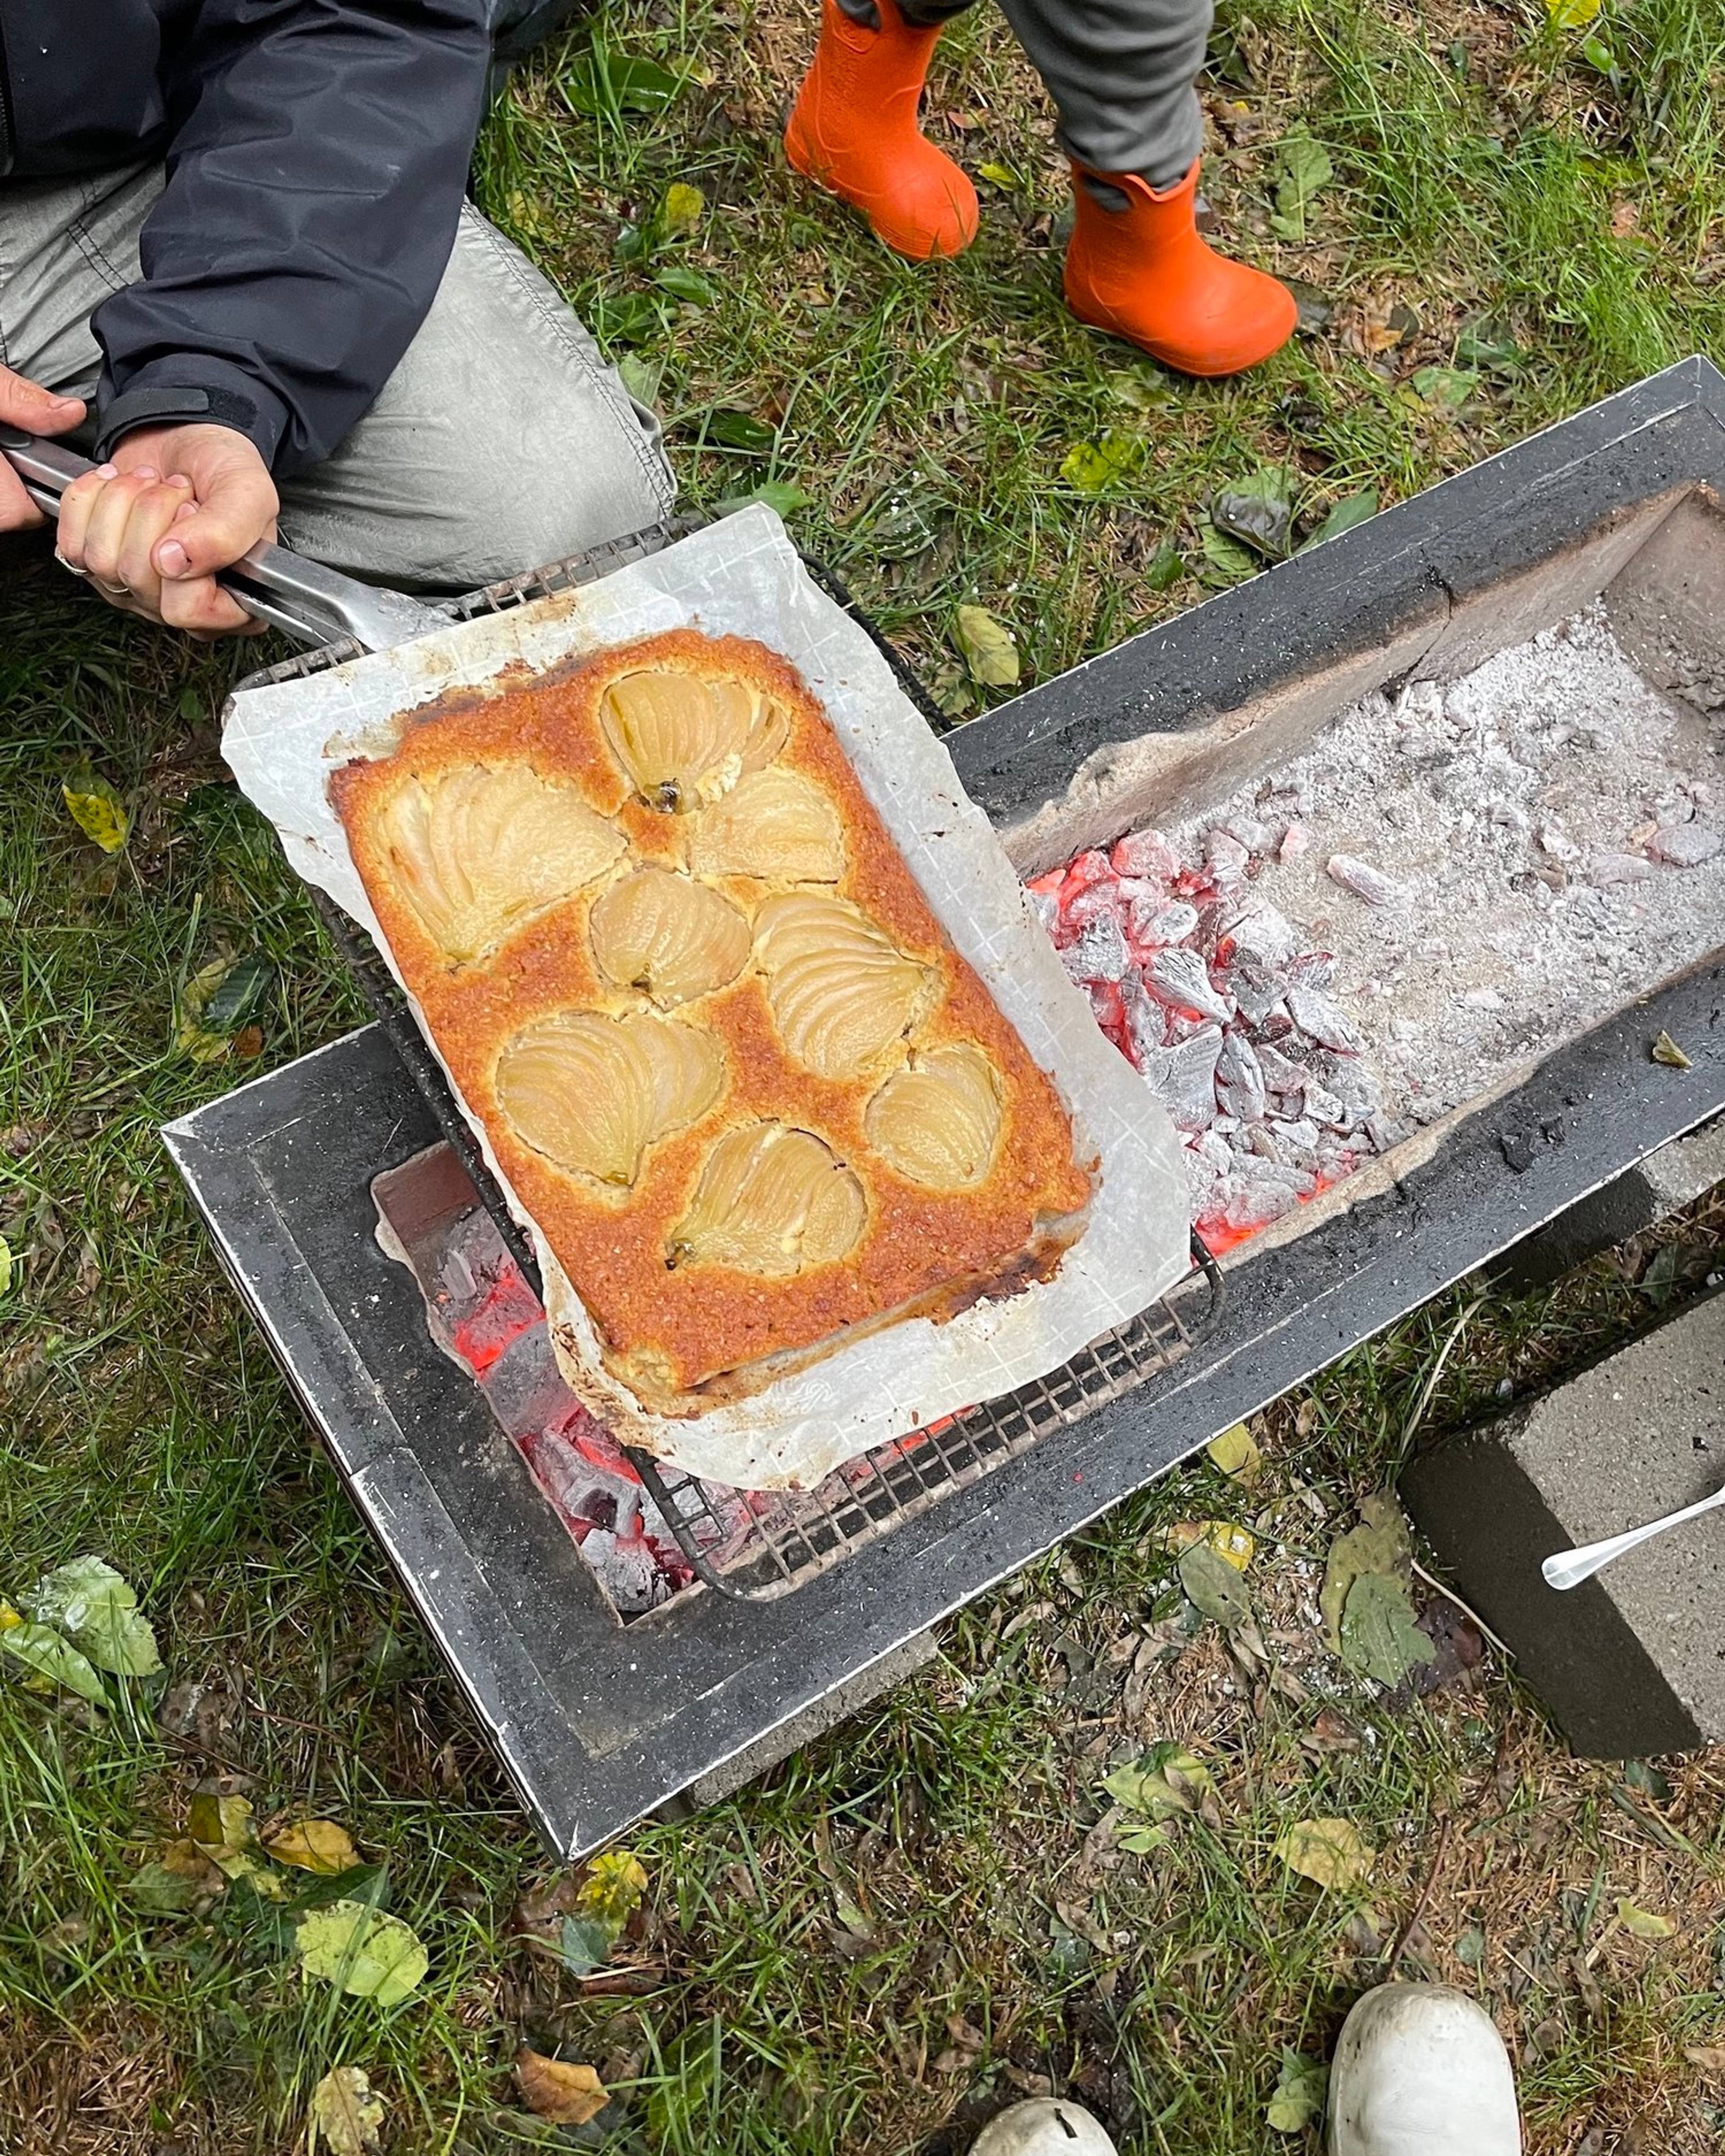 pear tart being cooked over open grill outside